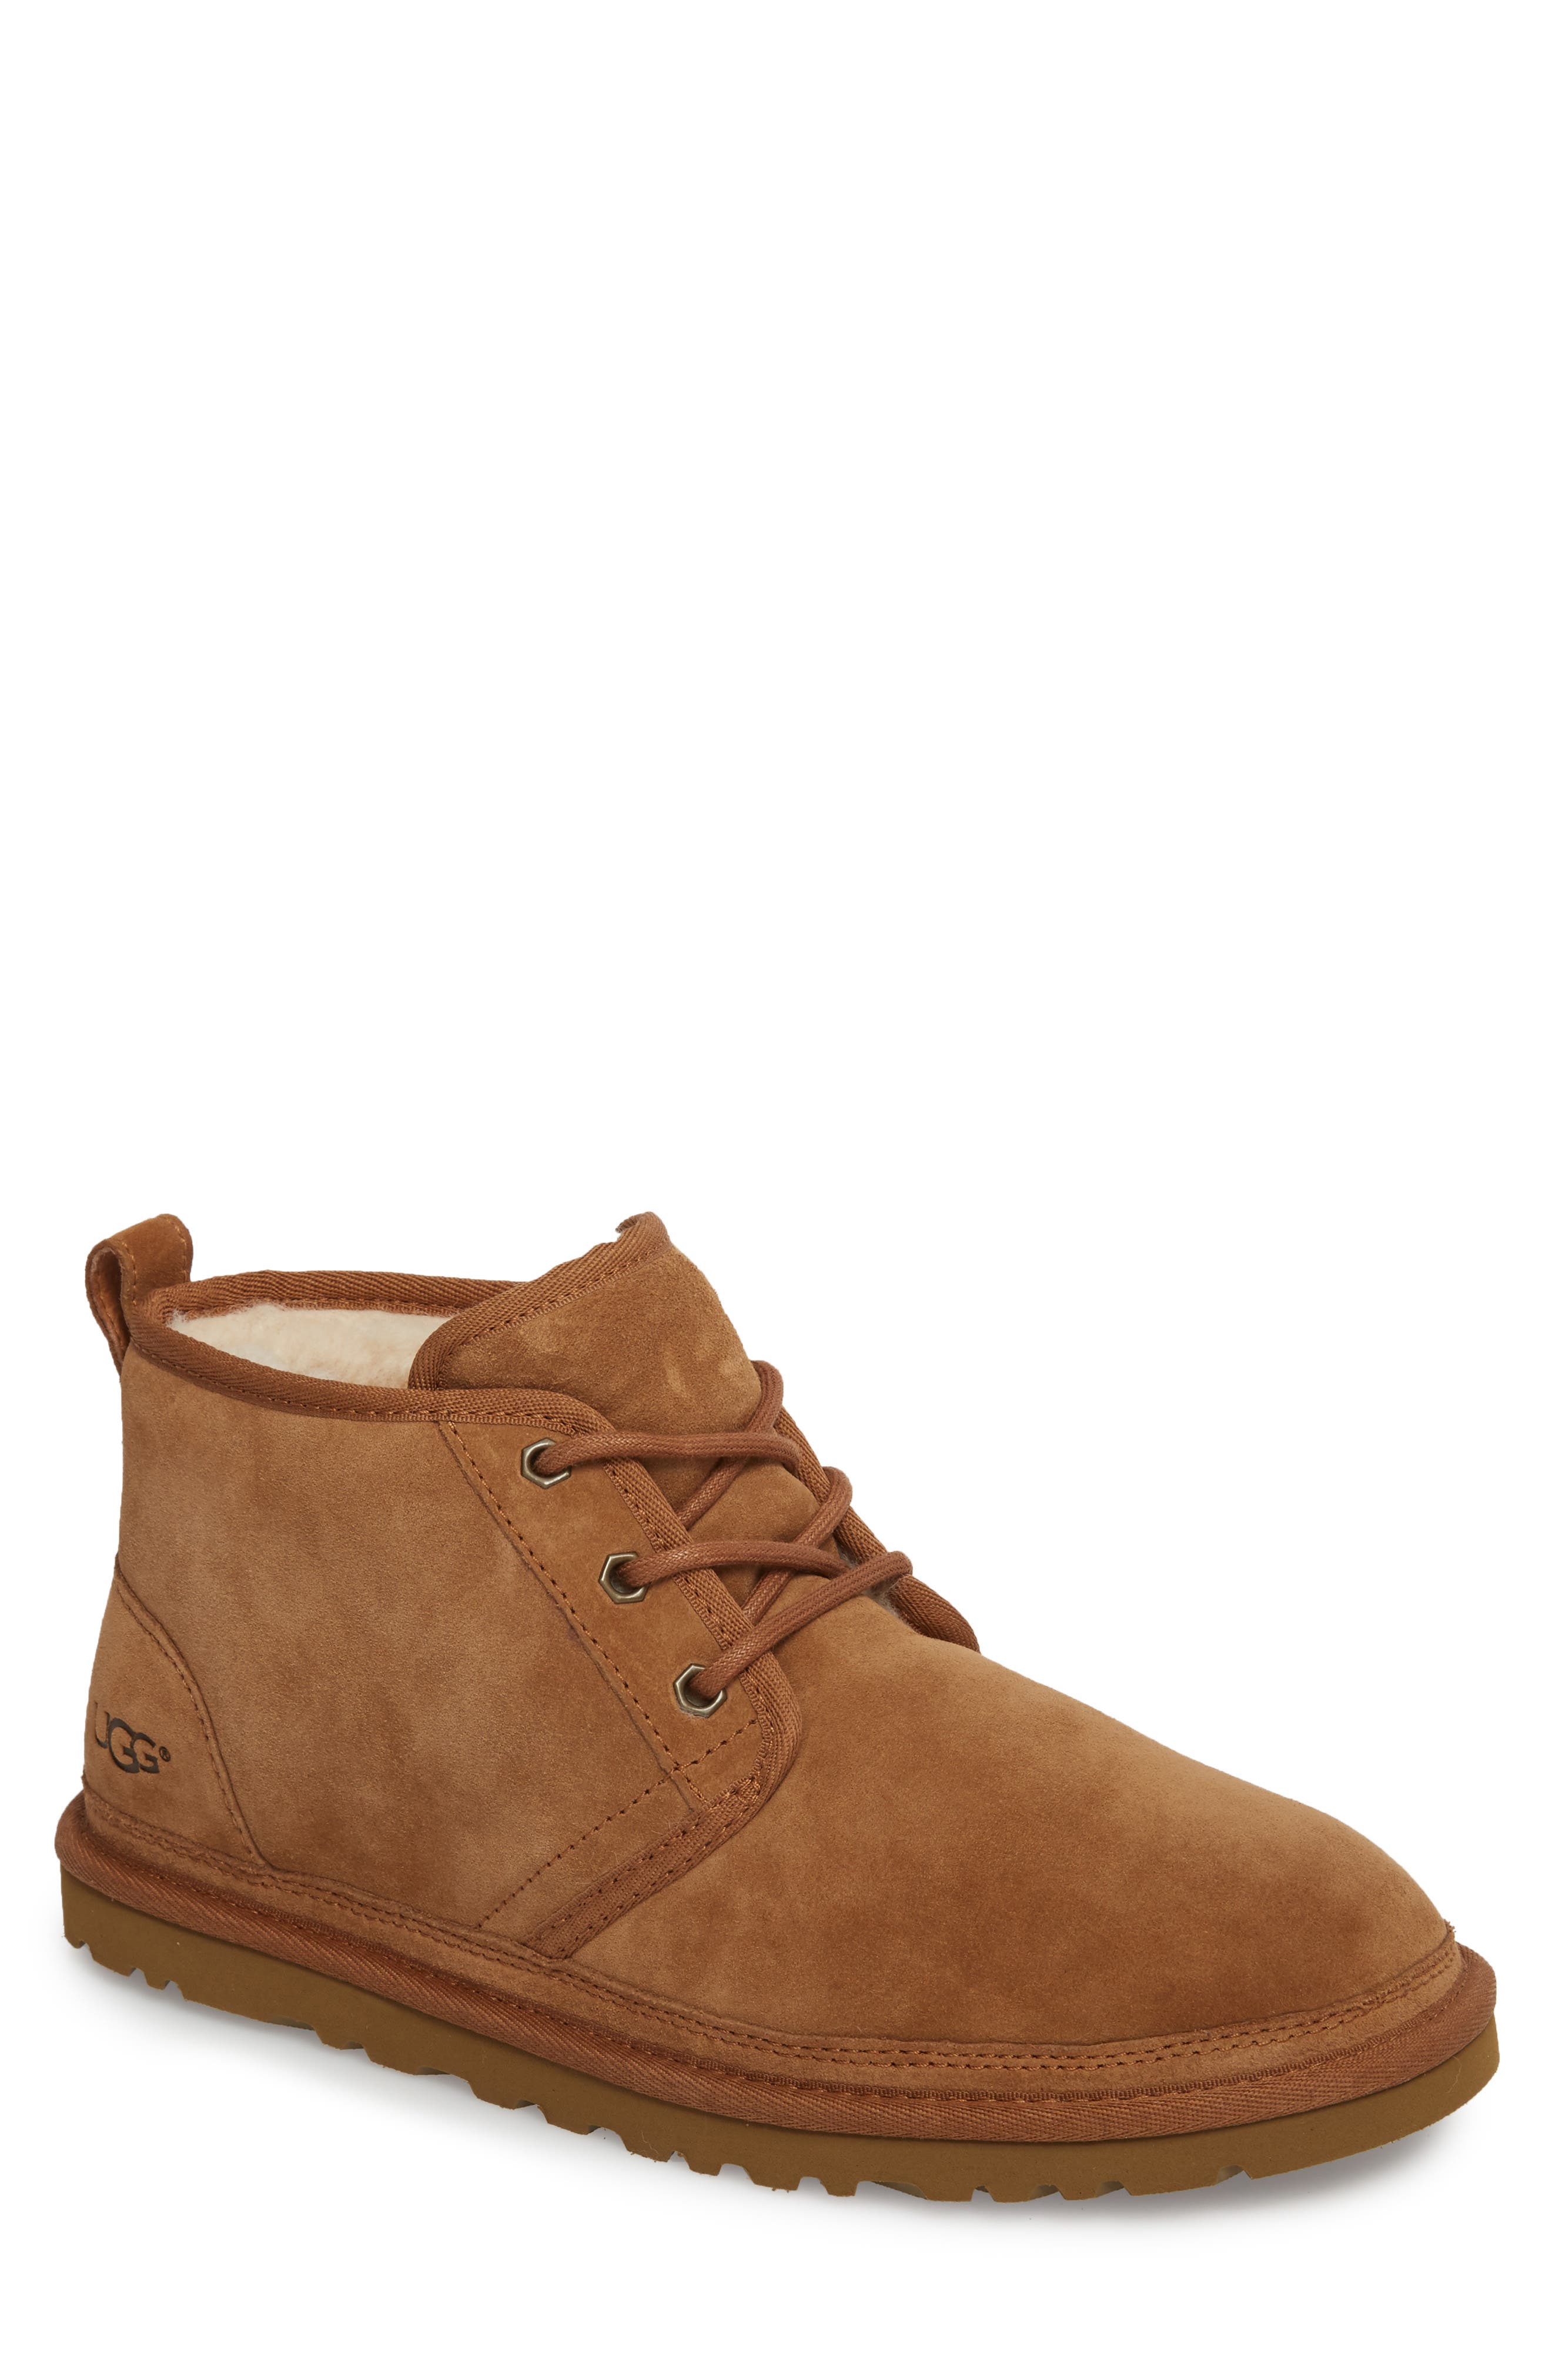 Mens Shoes Boots Casual boots Common Projects Suede Chukka Boots for Men 